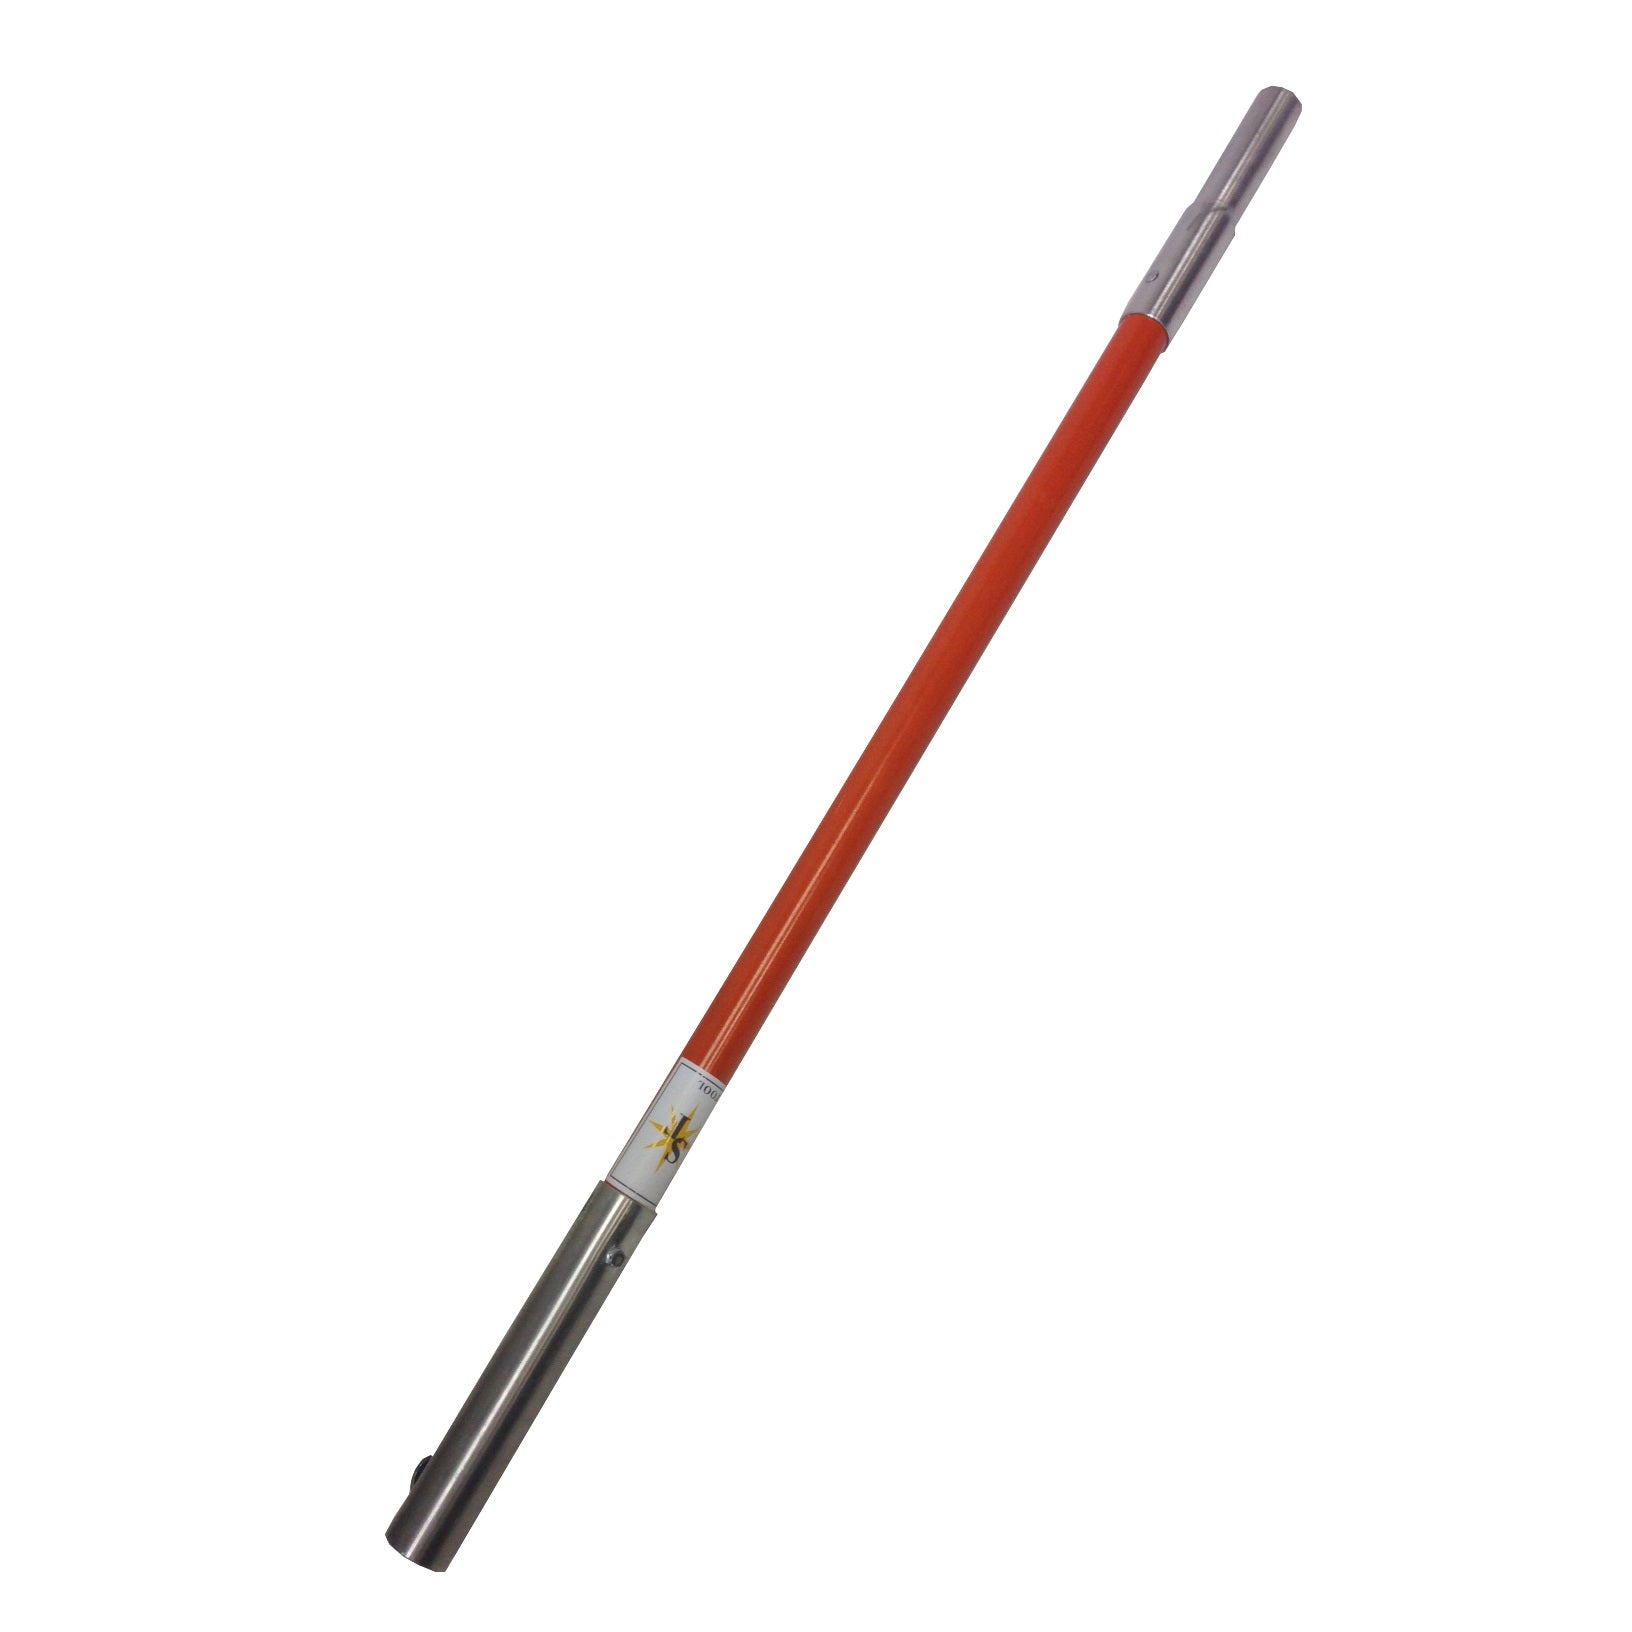 Steel Reinforced Fiberglass Pole for All Sewer Tools